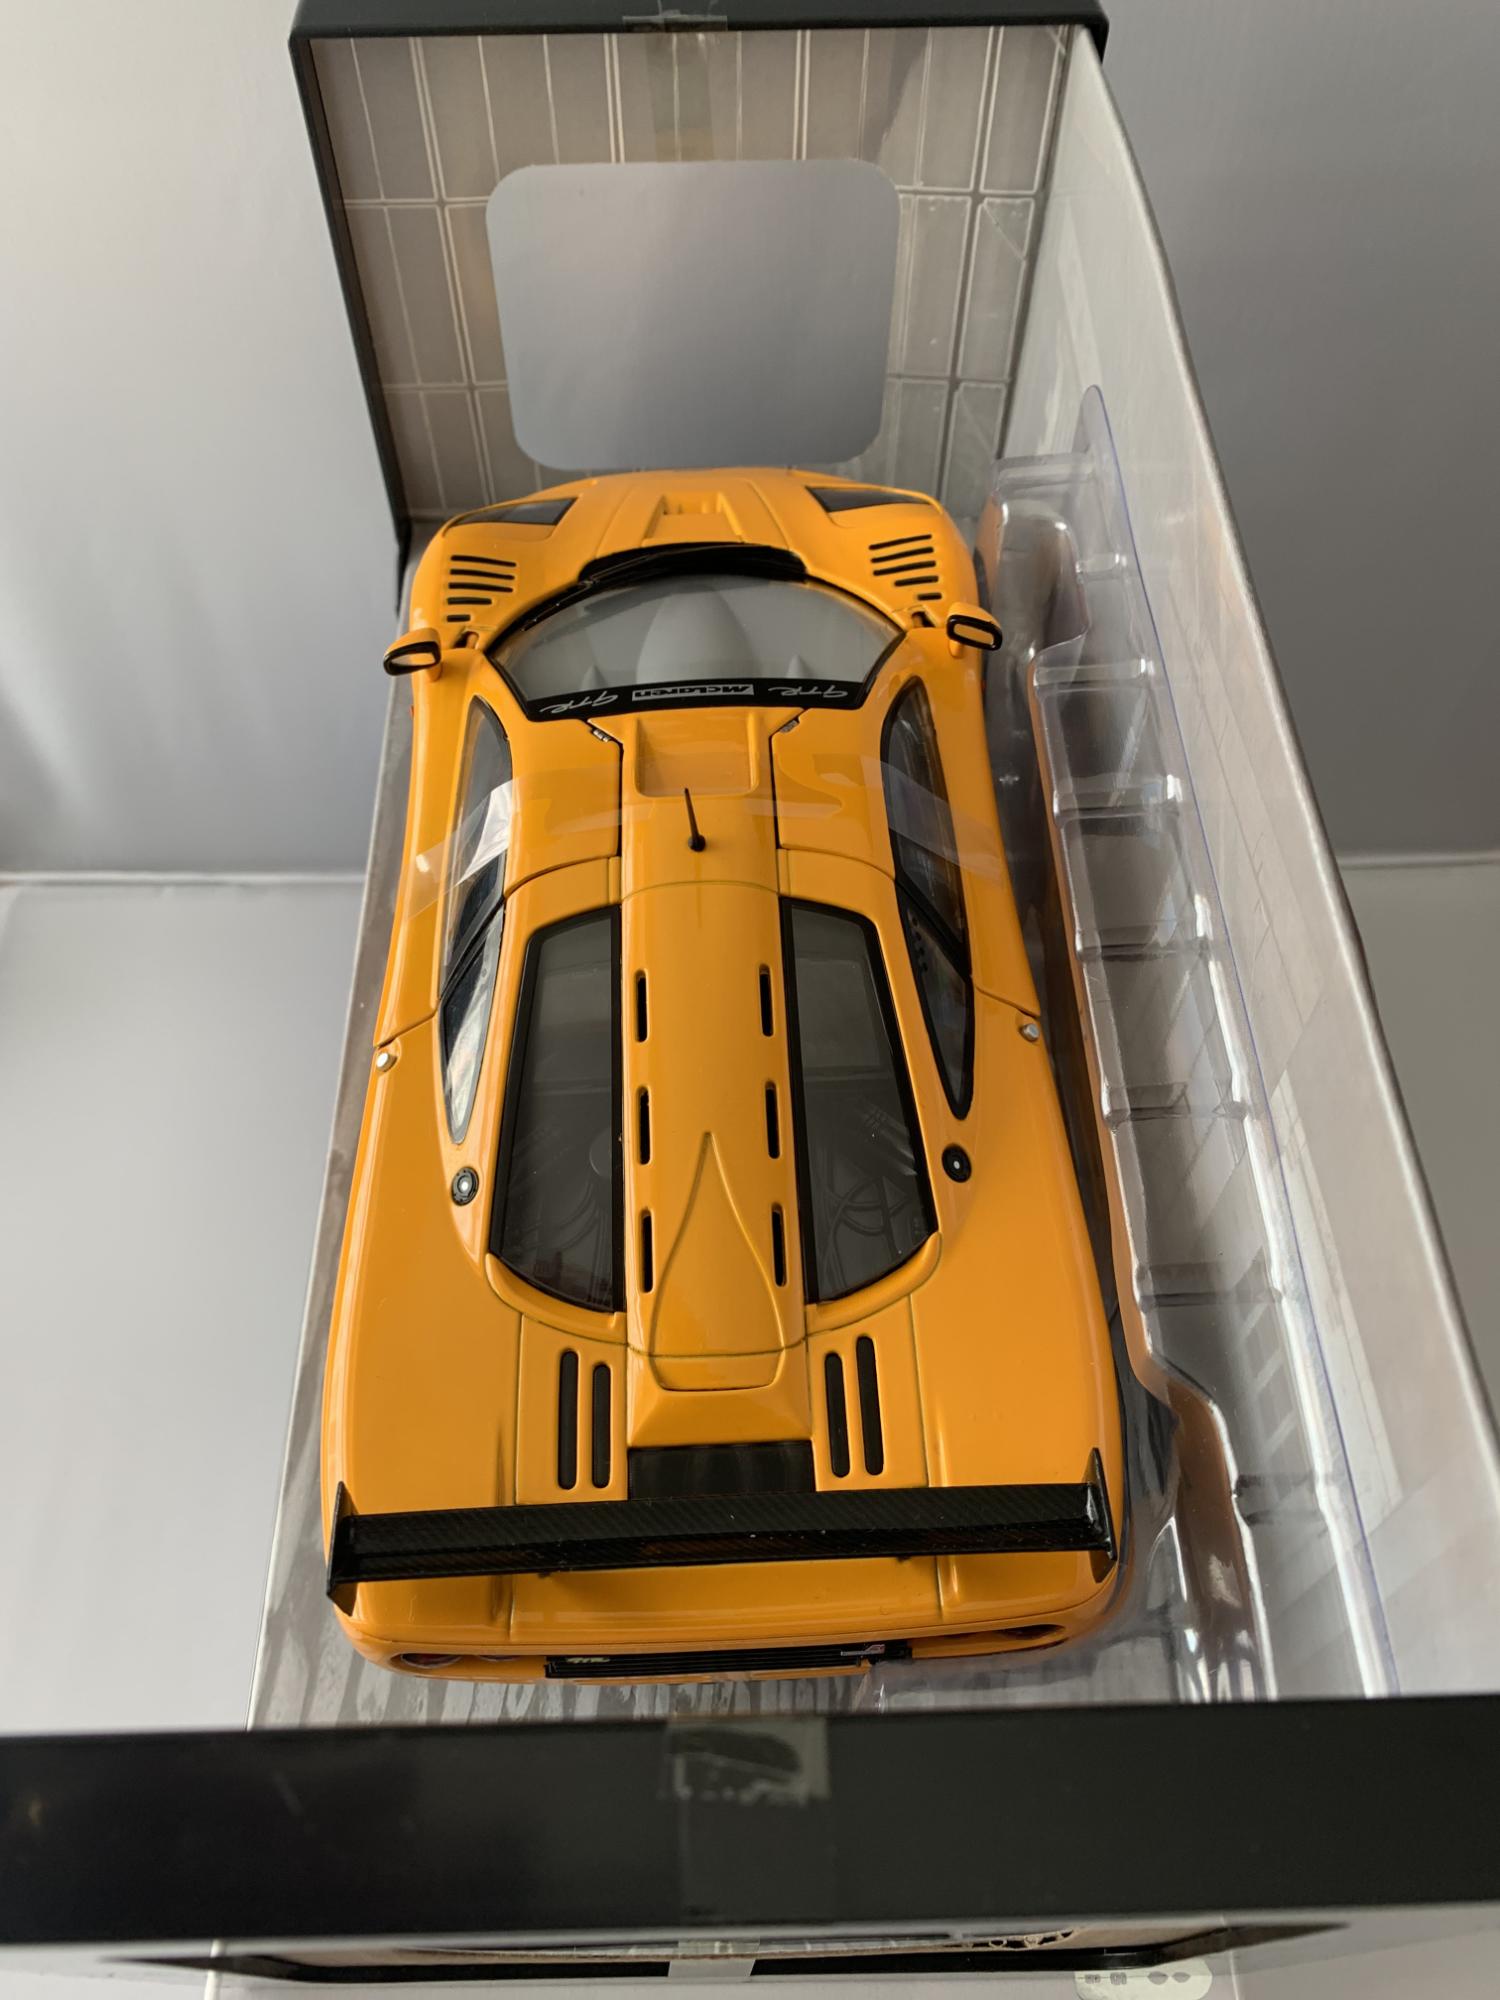 An excellent scale model of the McLaren F1 GTR with high level of detail throughout, all authentically recreated.  Model is presented in a window display box.   The car is approx. 24 cm long and the presentation box is 31 cm long